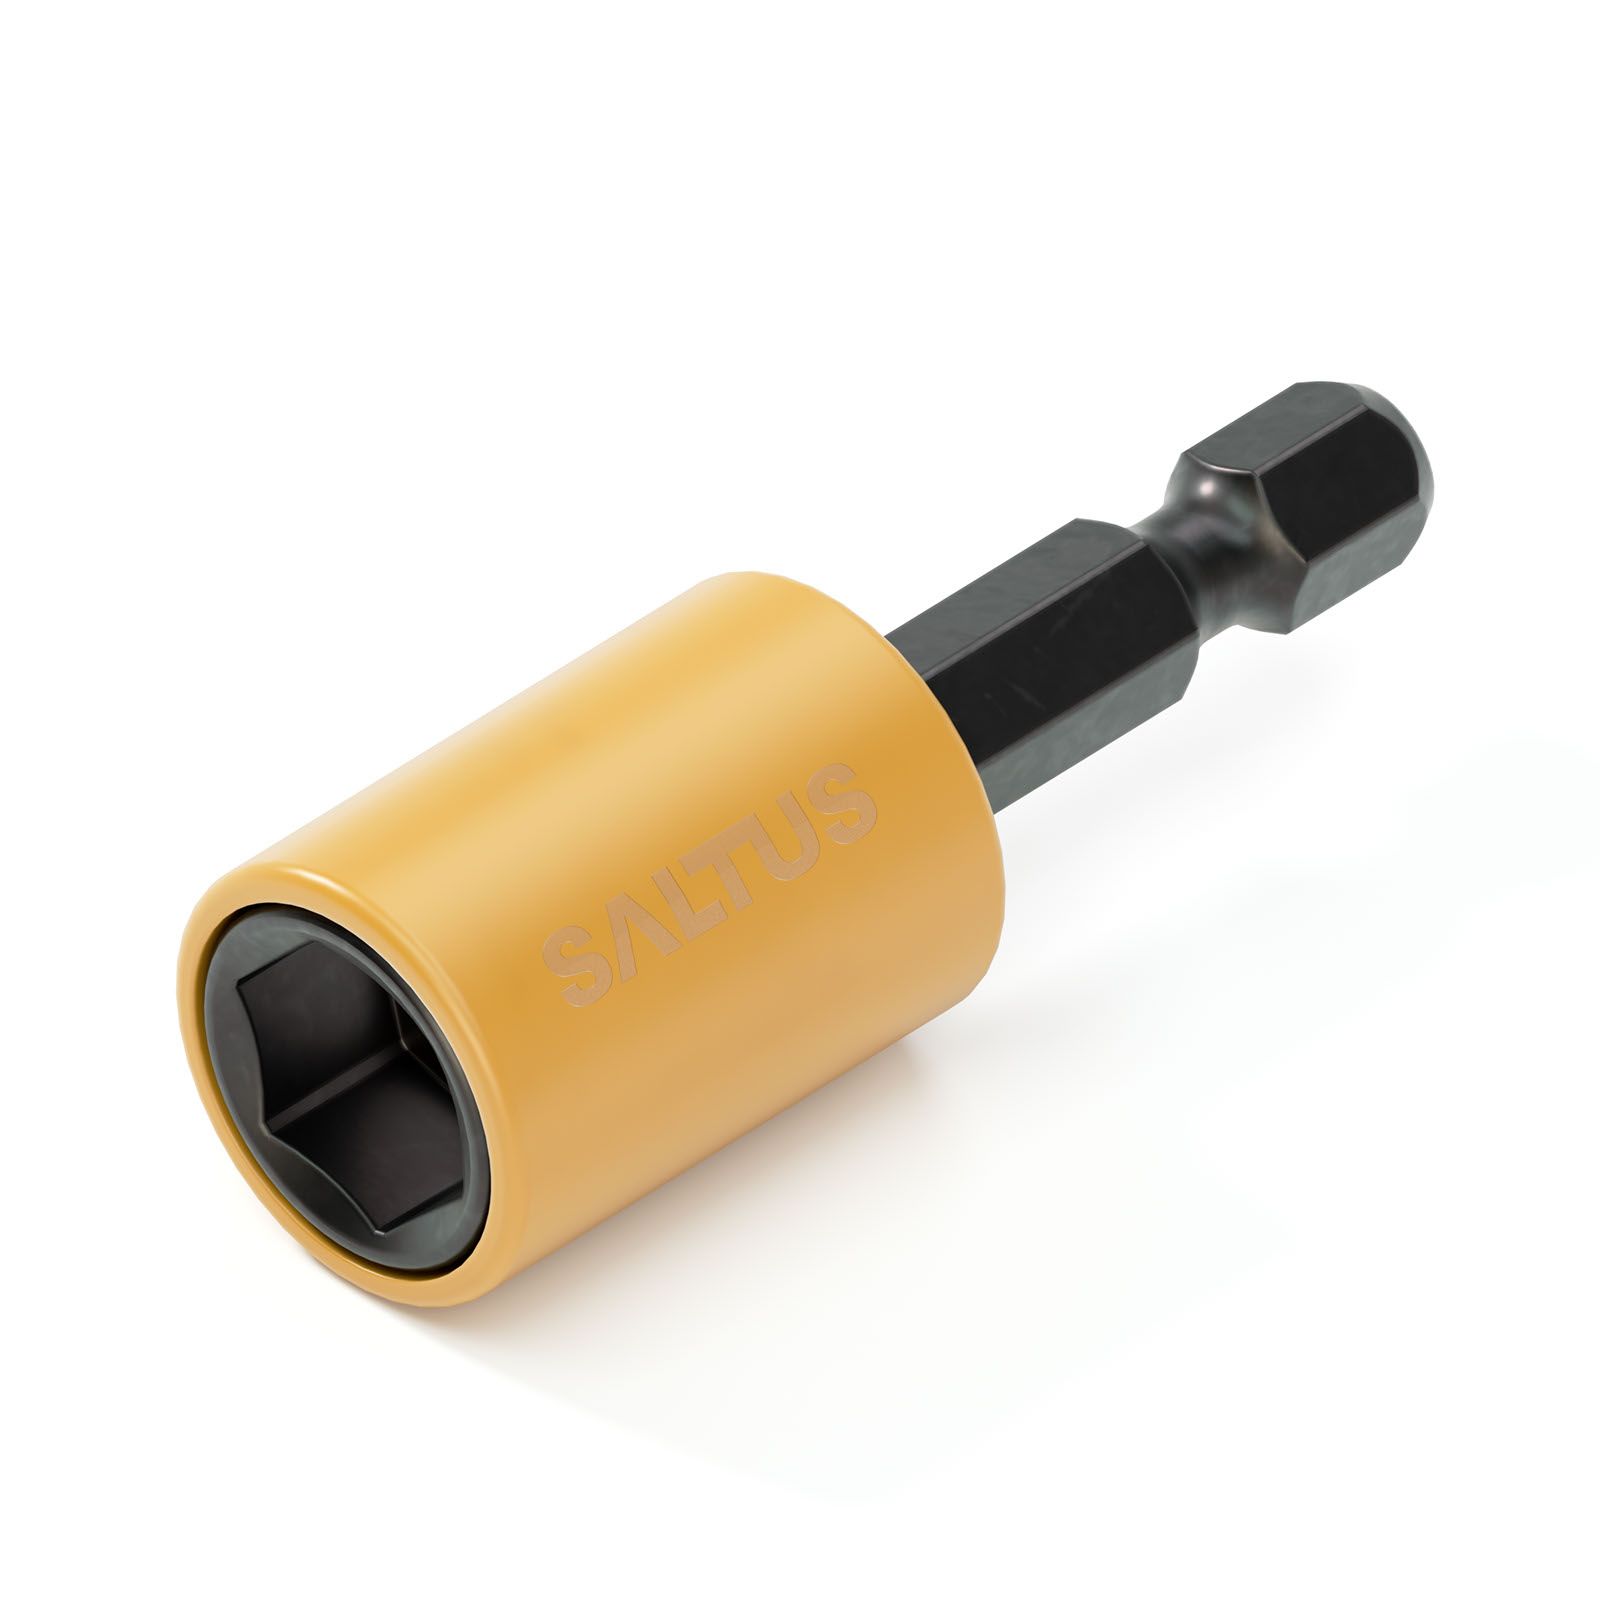 1/4" HEX Rotaction Nut Setters productfoto